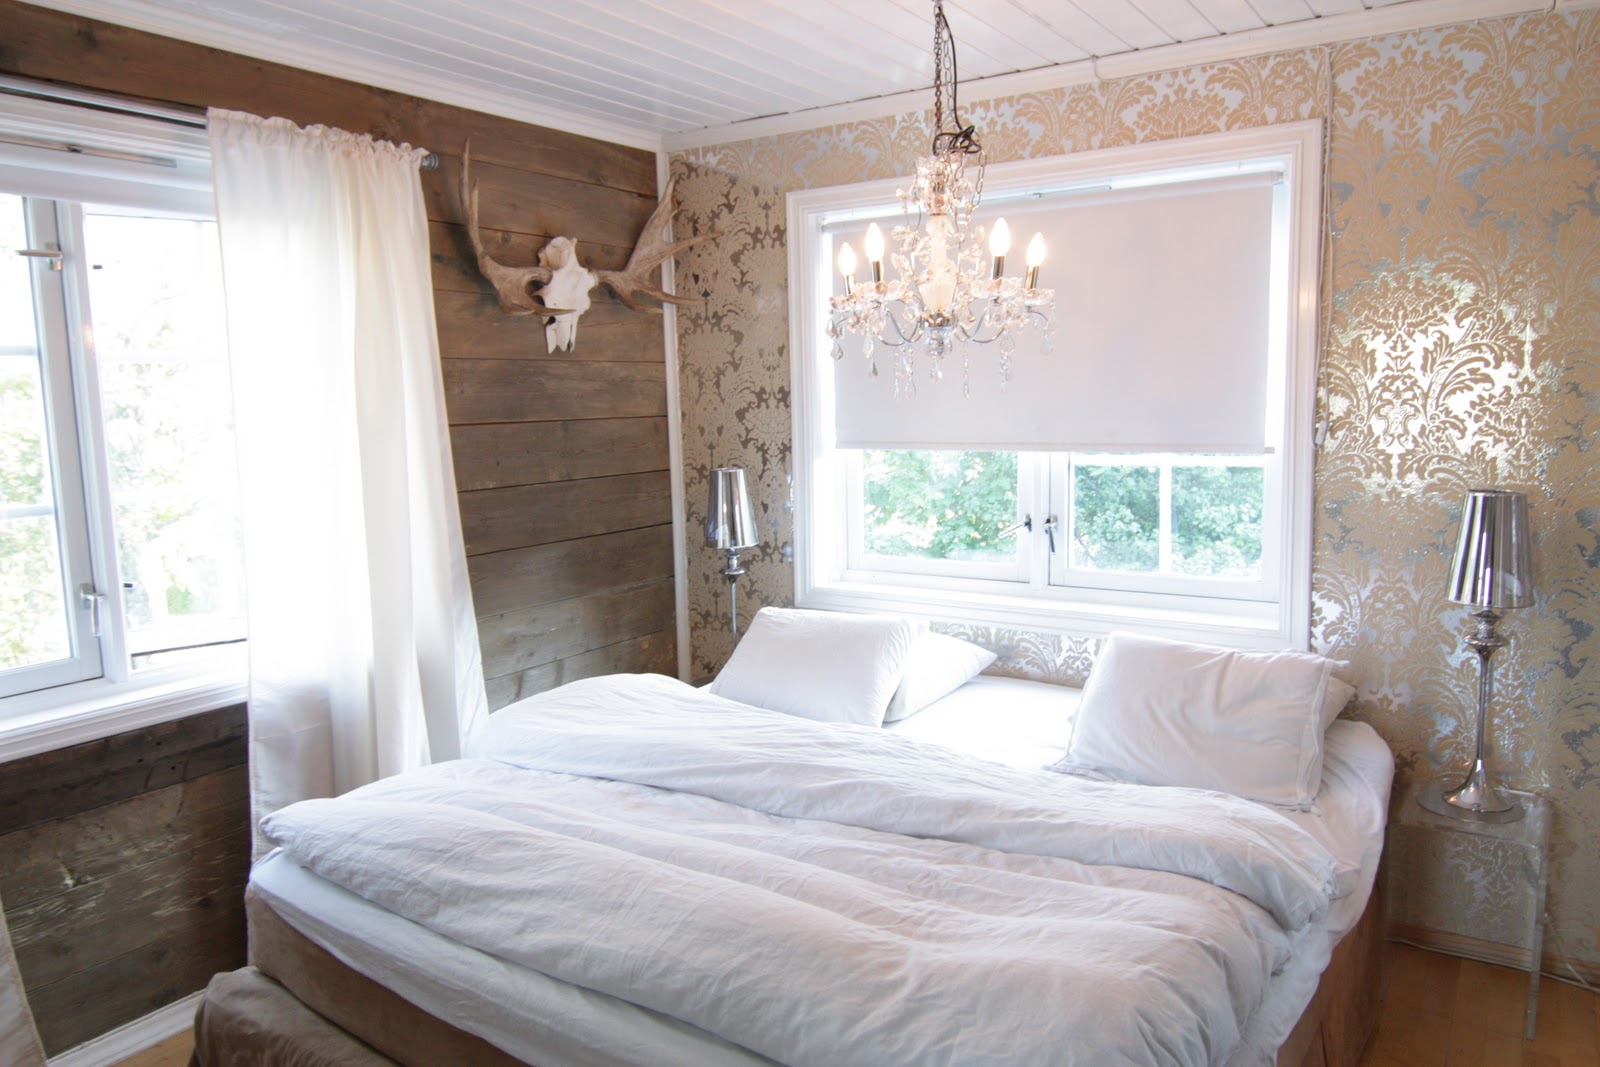 white walls and rustic wood